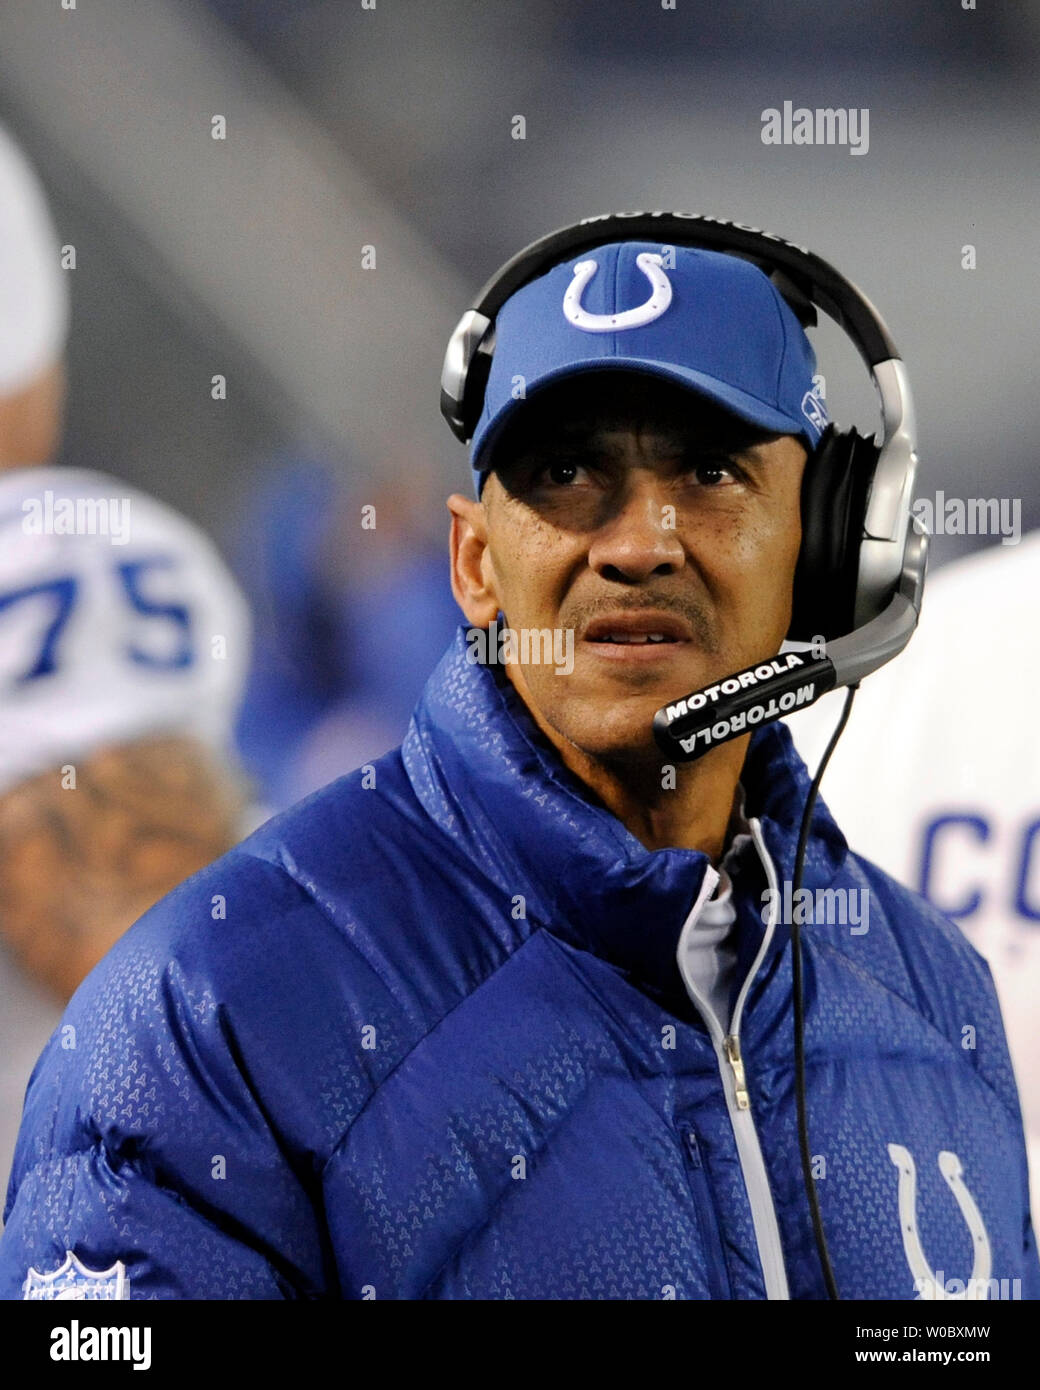 Indianapolis Colts head coach Tony Dungy coaches his team in the first quarter against the Baltimore Ravens on December 9, 2007 at M&T Bank Stadium in Baltimore, Maryland.  (UPI Photo/ Mark Goldman) Stock Photo